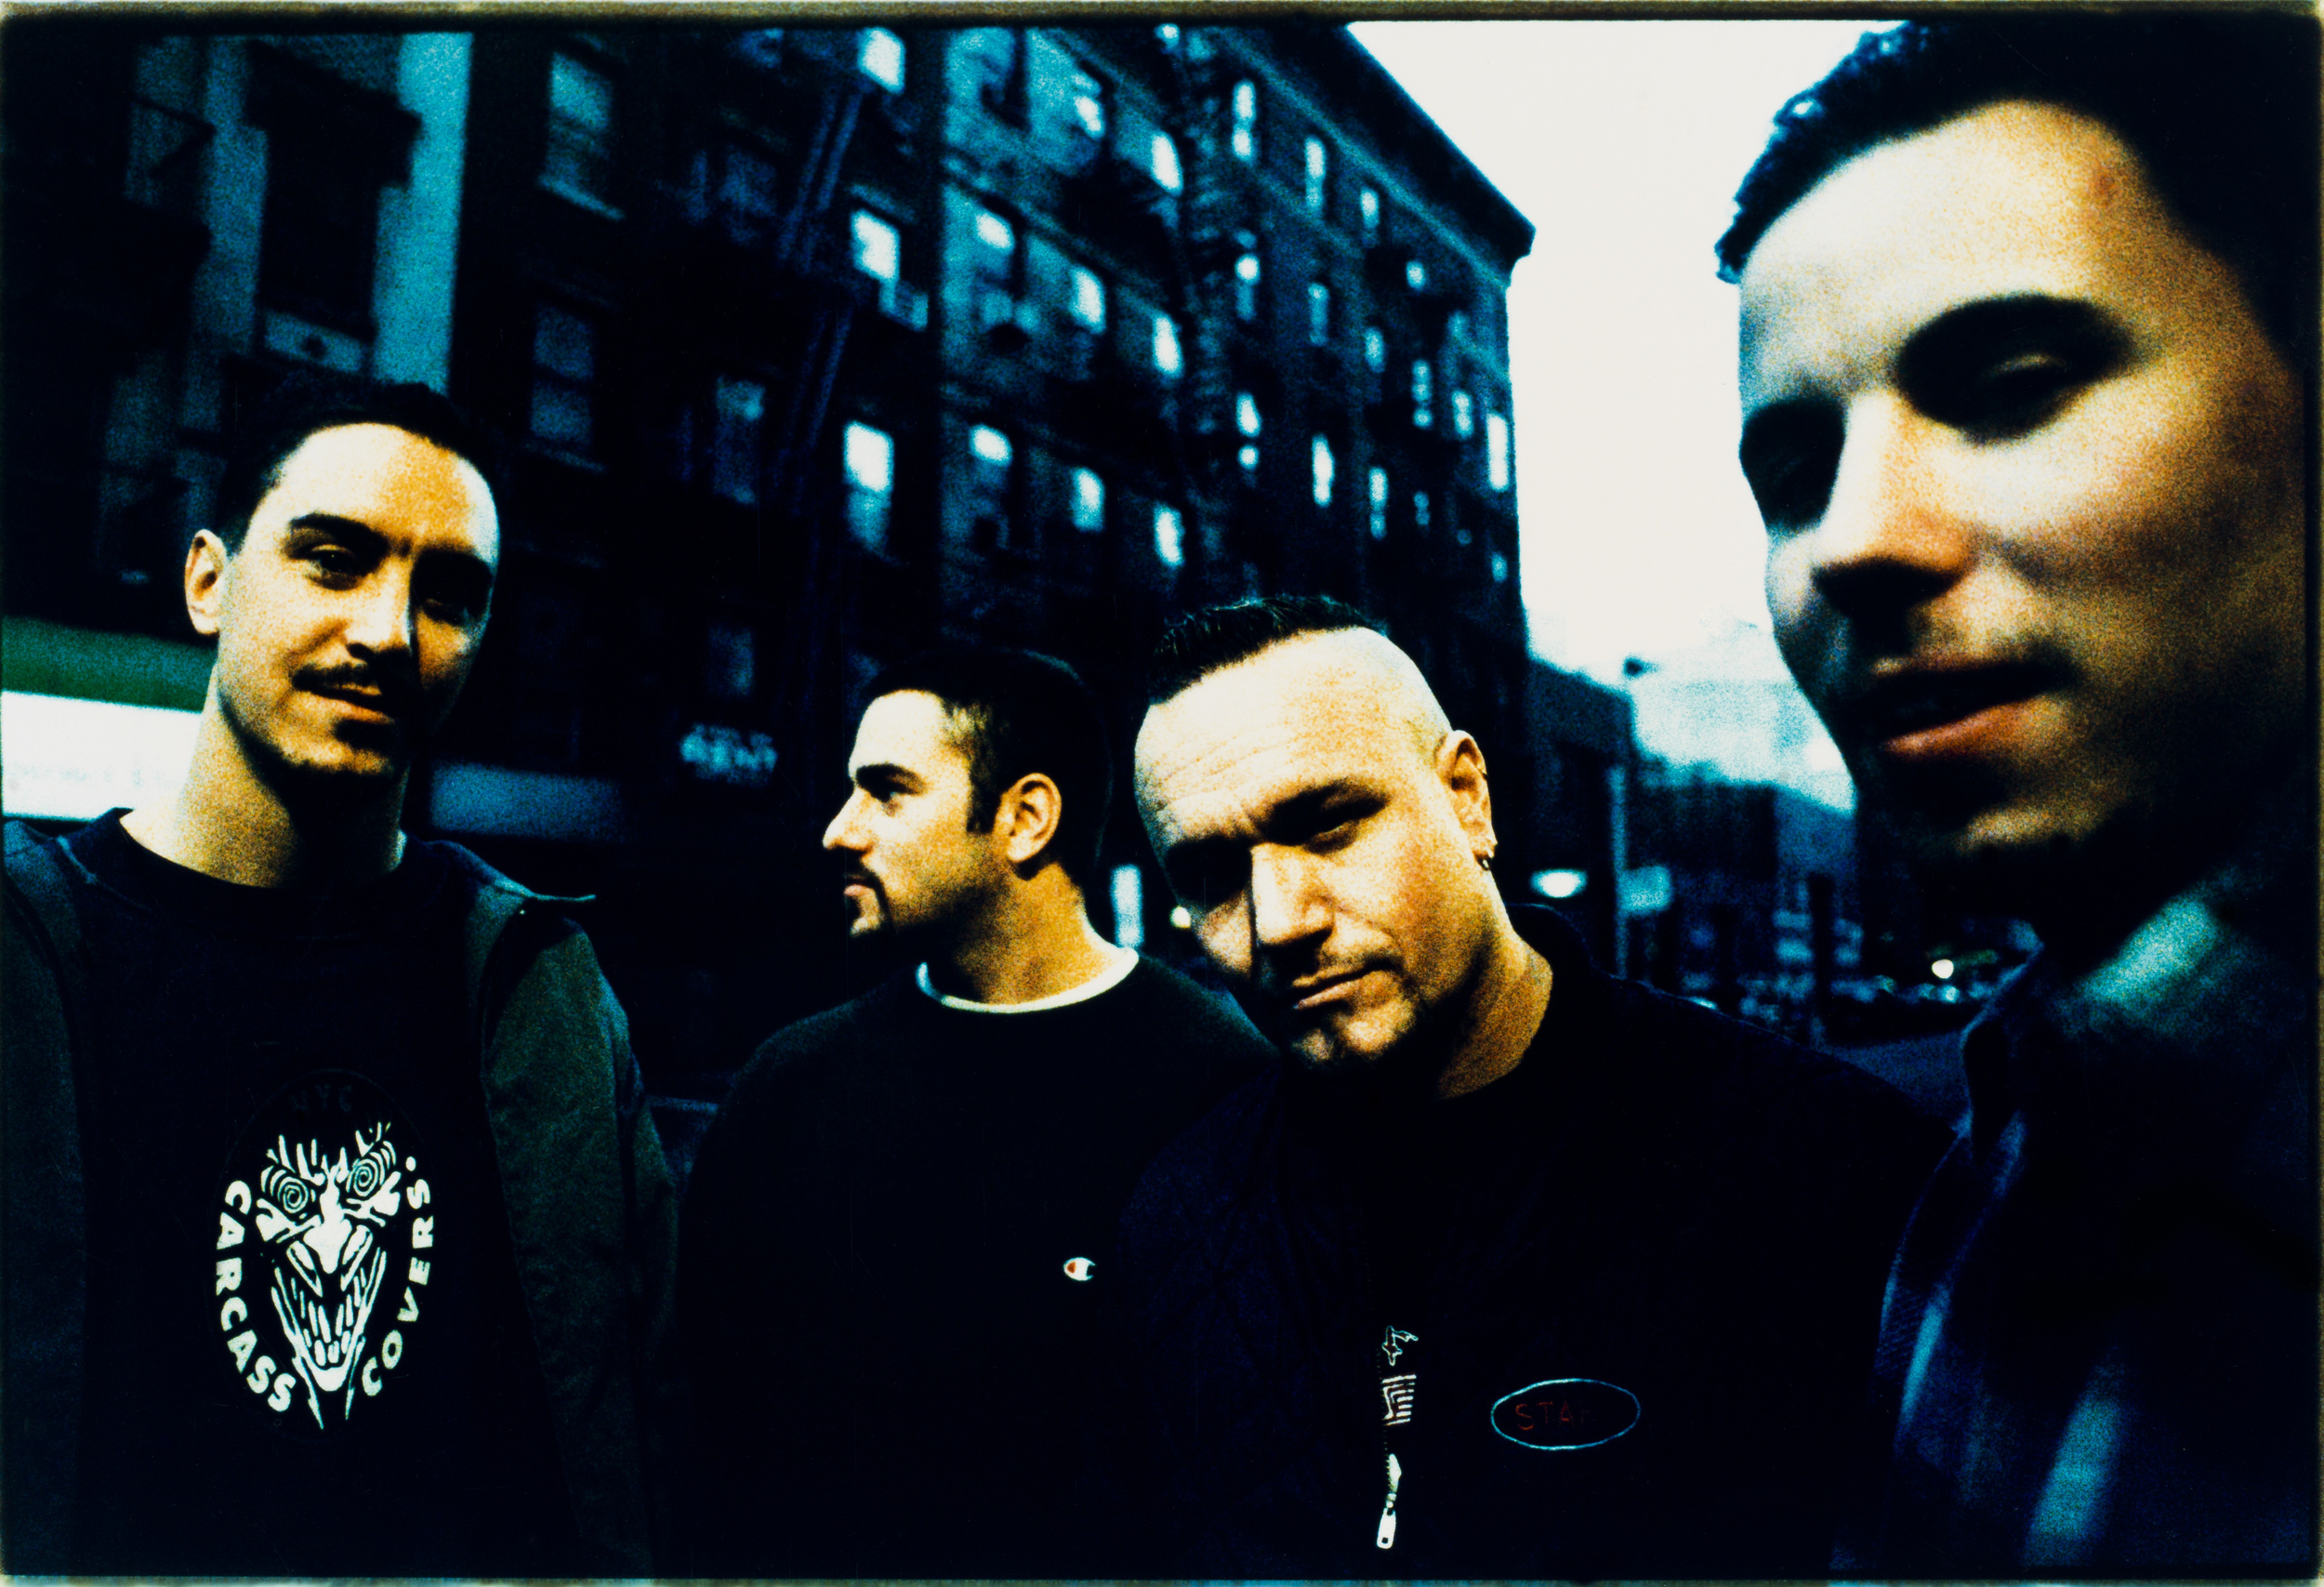 <p>NYHC went mainstream (kind of) when Sick of It All signed with Warner Bros. imprint East West Records in 1993. When <em>Scratch the Surface </em>was released in 1994, it may not have been the breakthrough the label was hoping for, but it did allow the band to reach middle America and all the other rural areas where they were unknown prior. This allowed Sick of It All to have the longevity most hardcore bands can't manage.</p><p><a href='https://www.msn.com/en-us/community/channel/vid-cj9pqbr0vn9in2b6ddcd8sfgpfq6x6utp44fssrv6mc2gtybw0us'>Follow us on MSN to see more of our exclusive entertainment content.</a></p>